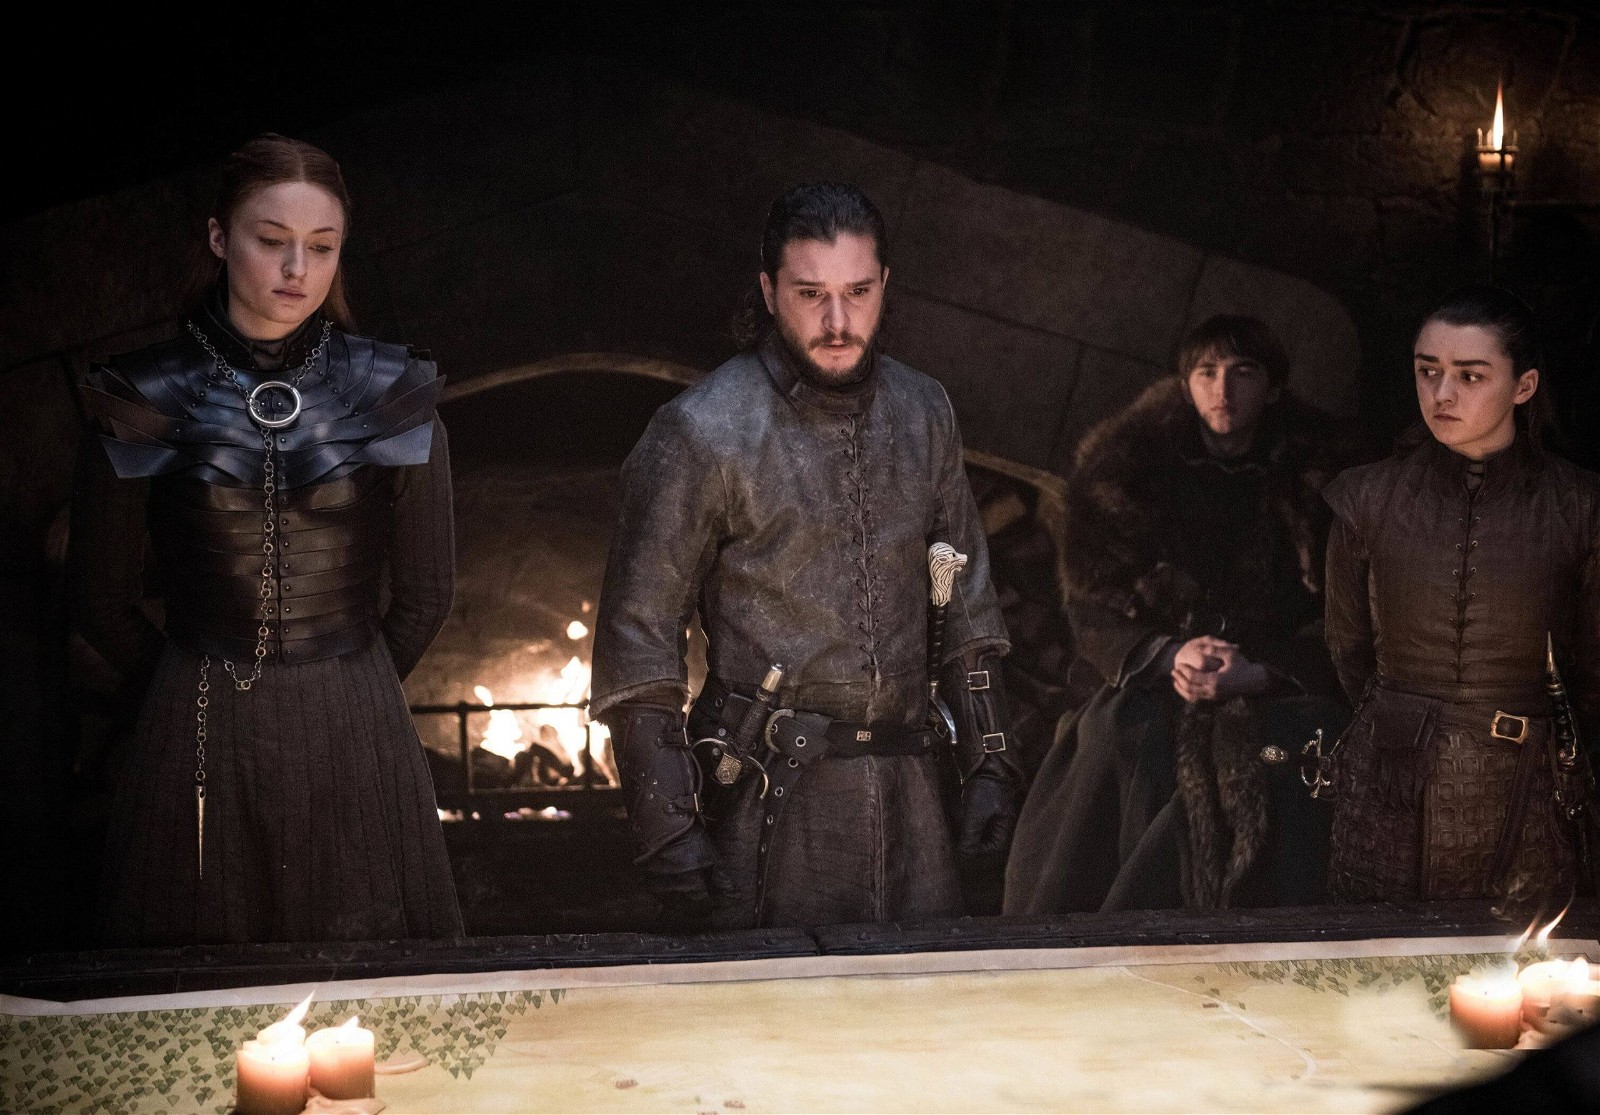 Sophie Turner and Kit Harington with Maisie Williams and Isaac Hempstead-Wright in Game of Thrones